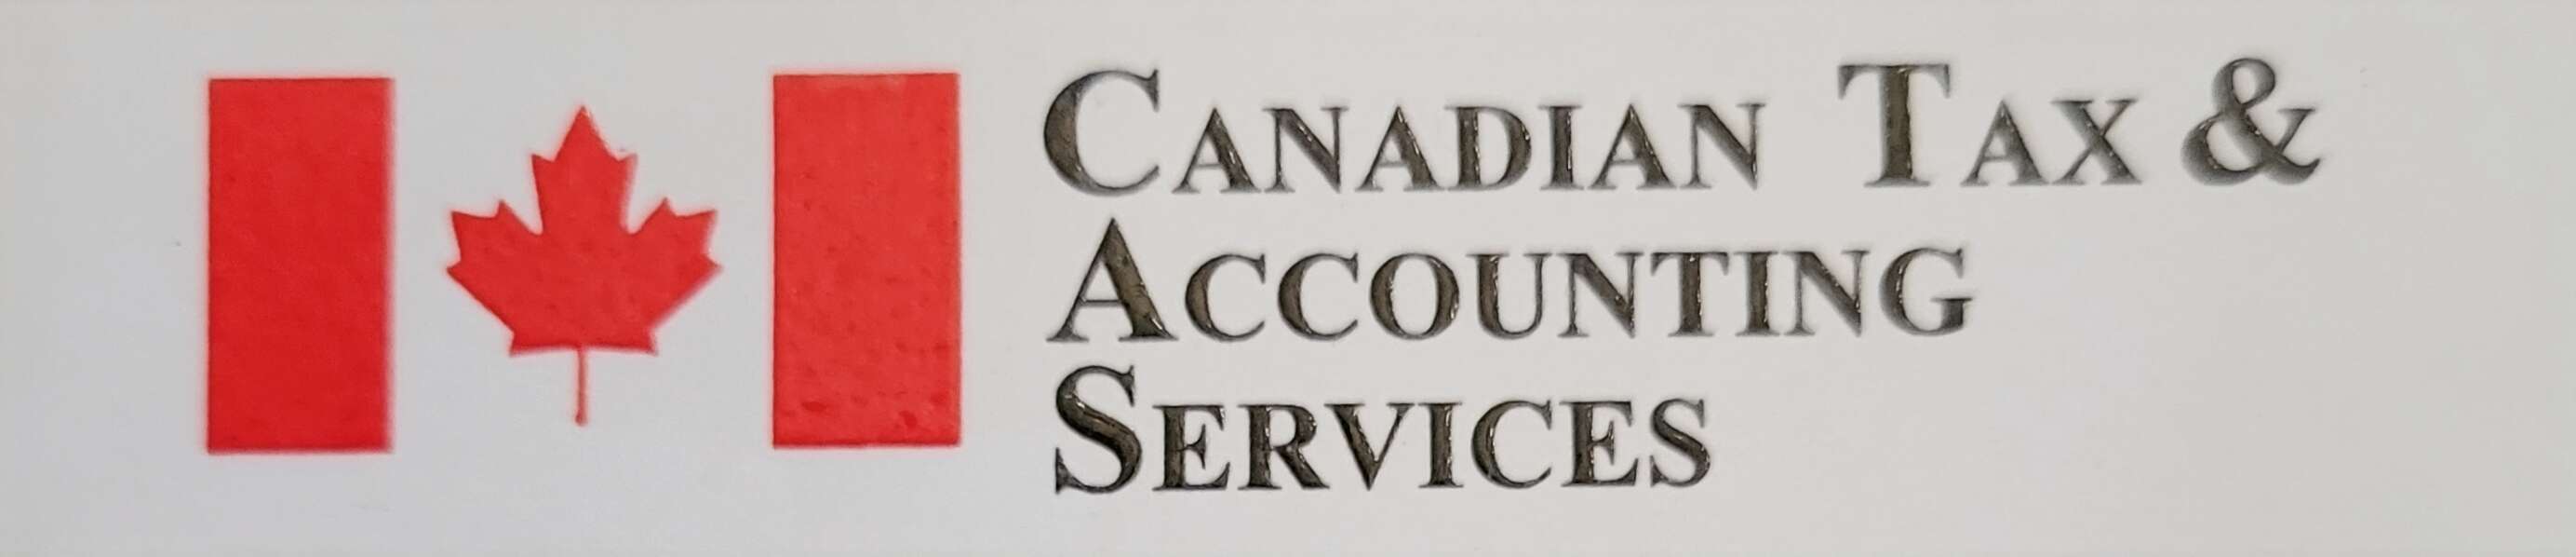 Canadian Tax & Accounting Services